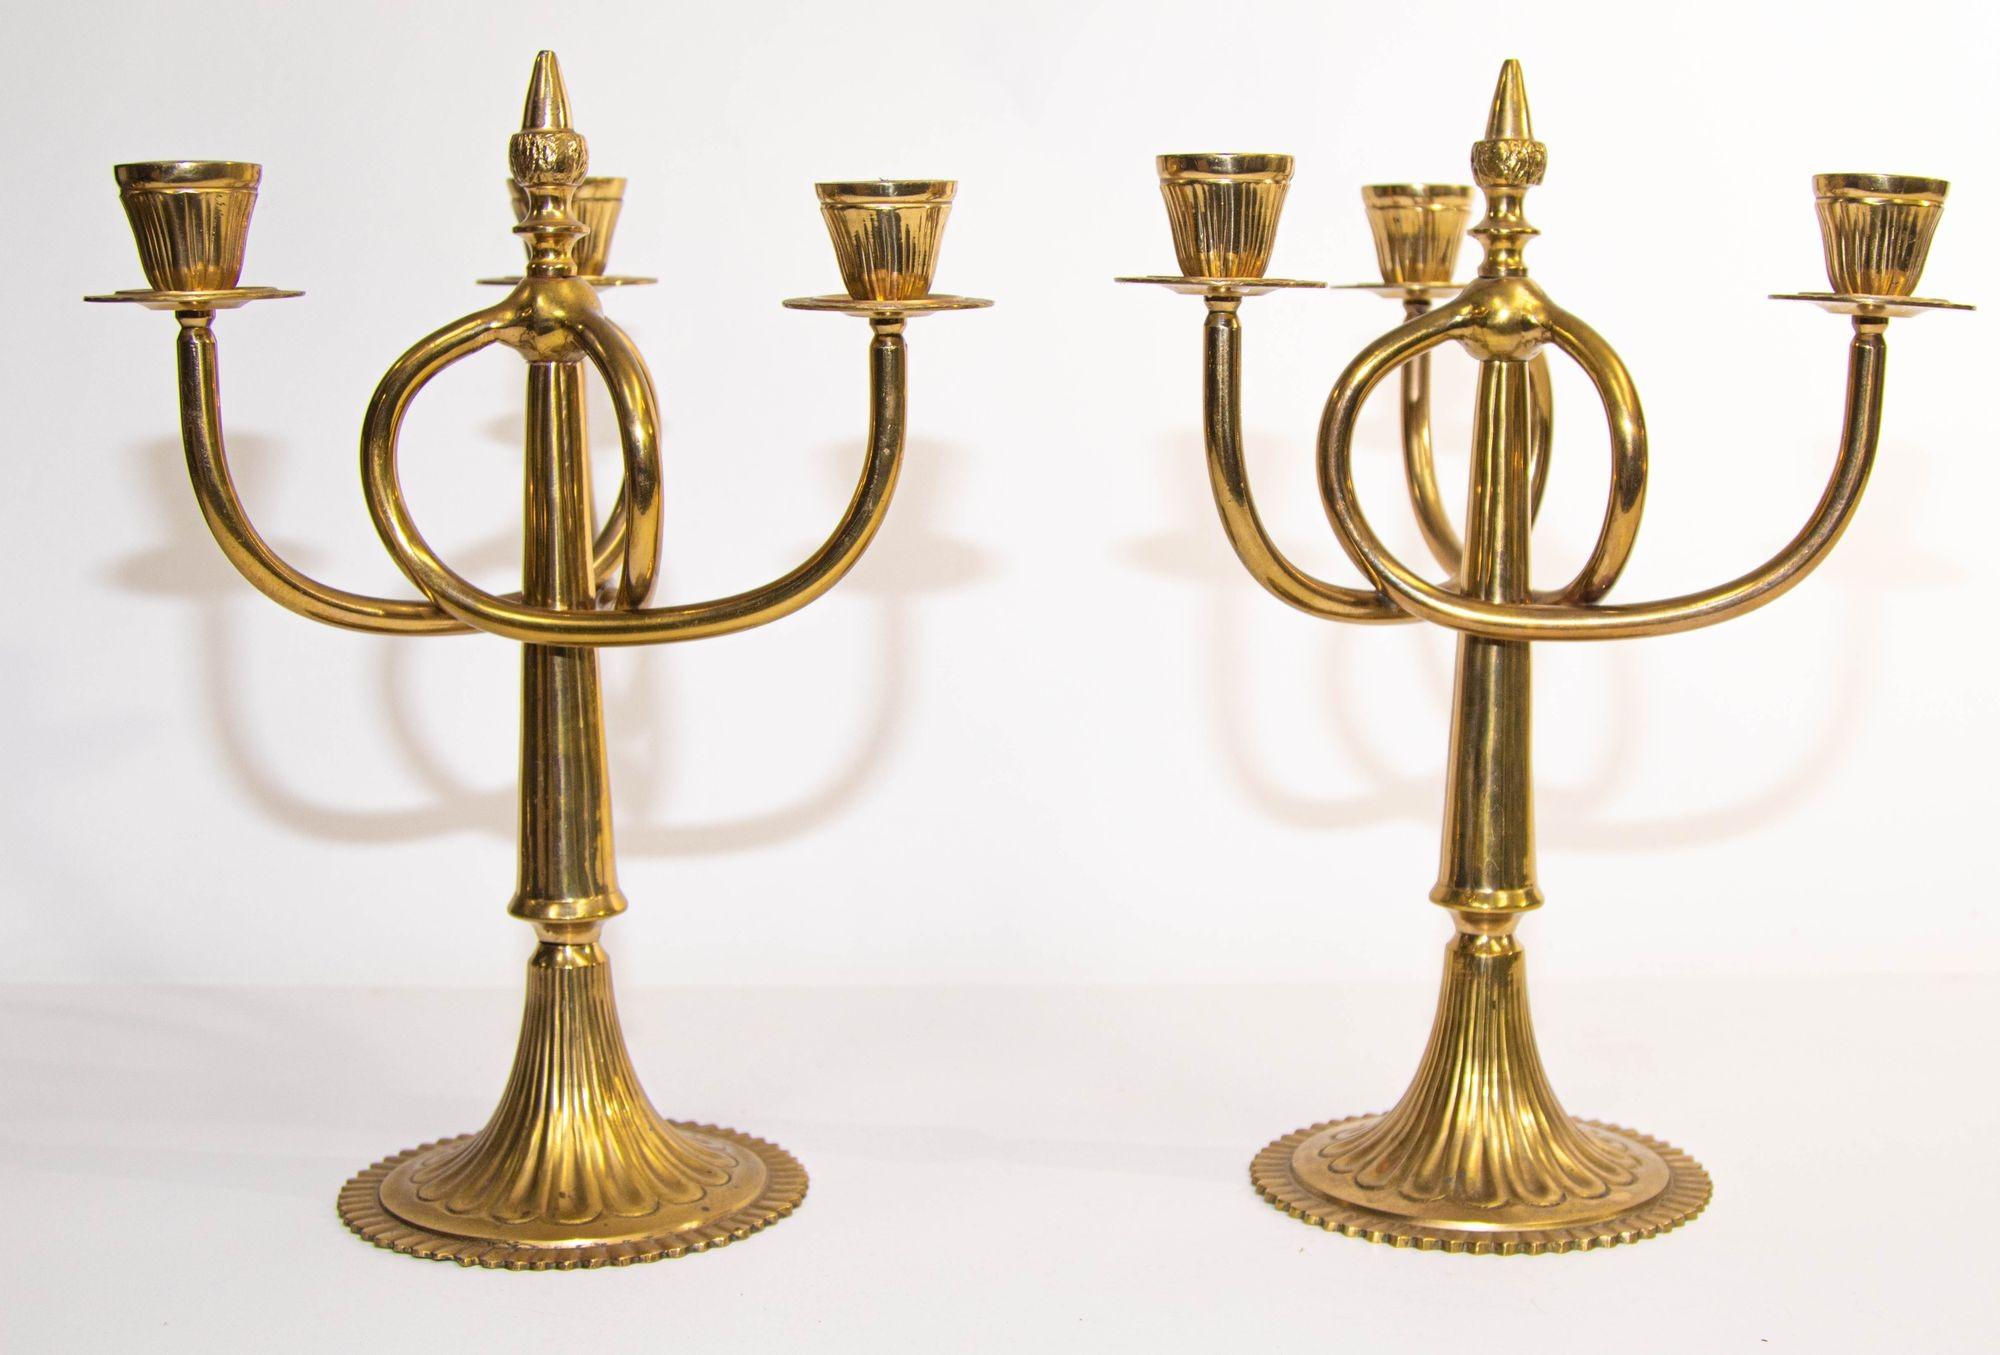 Vintage Pair of Brass Art Nouveau Candelabras with 3 Branches, c.1950 10